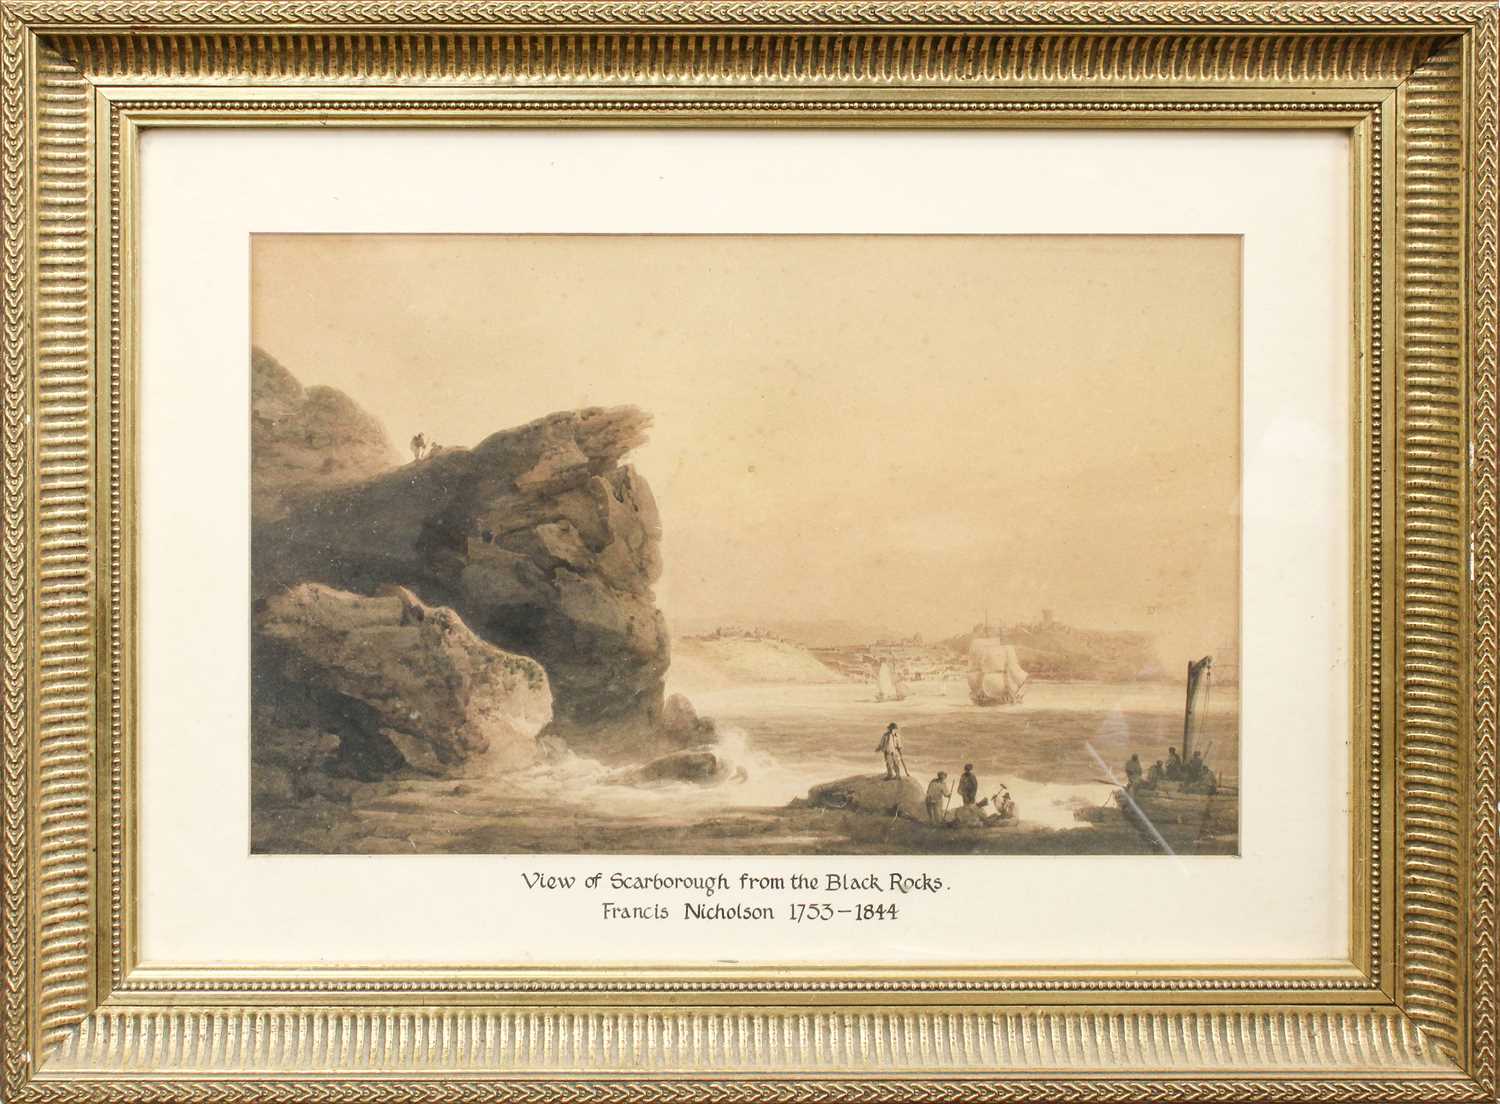 Attributed to Francis Nicholson OWS (1753-1844) "View of Scarborough from the Black Rocks"